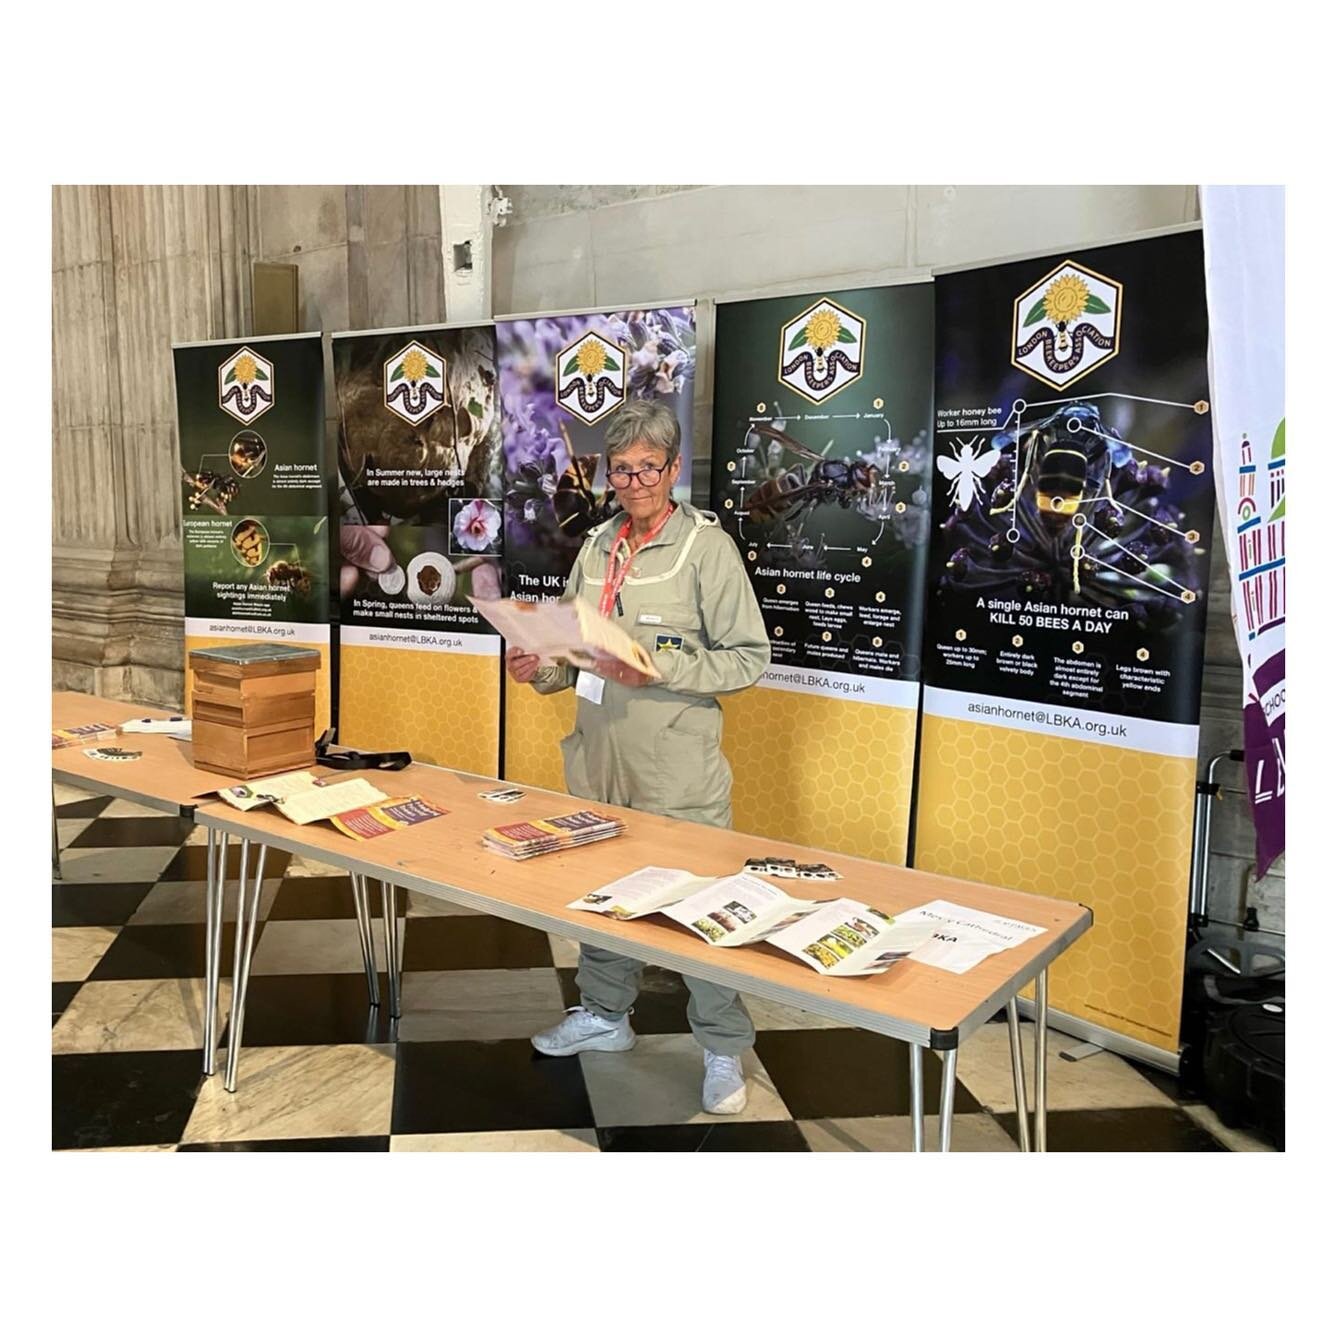 This is Annie who looks after the bees at Bell House and is on the committee for @londonbeekeepersassociation. Annie recently attended a &lsquo;Messy Cathedral&rsquo; day at @stpaulscathedrallondon to alert people to the threat to all pollinators fro